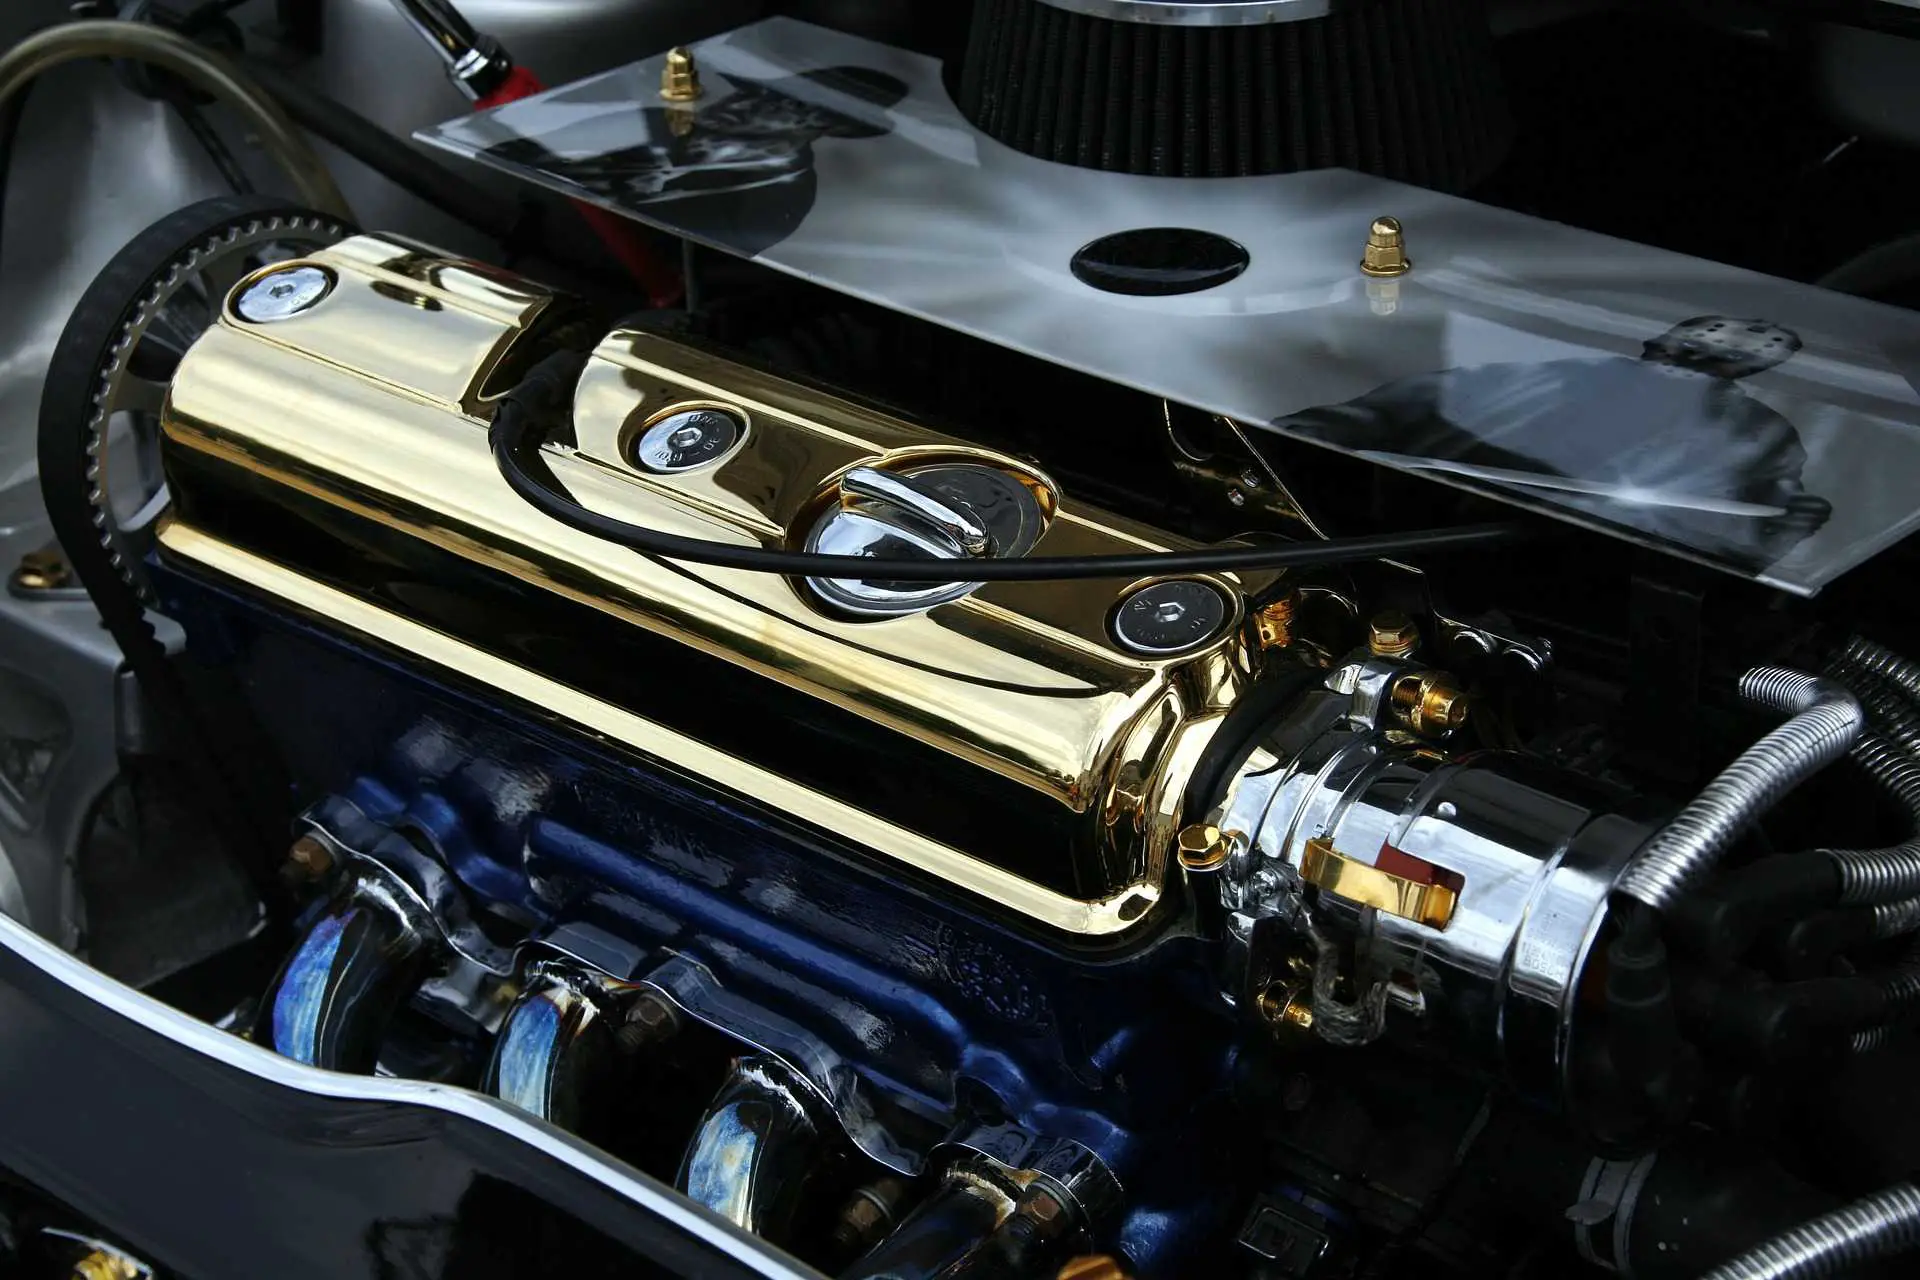 Can You Fit an Old Car With a New Engine?